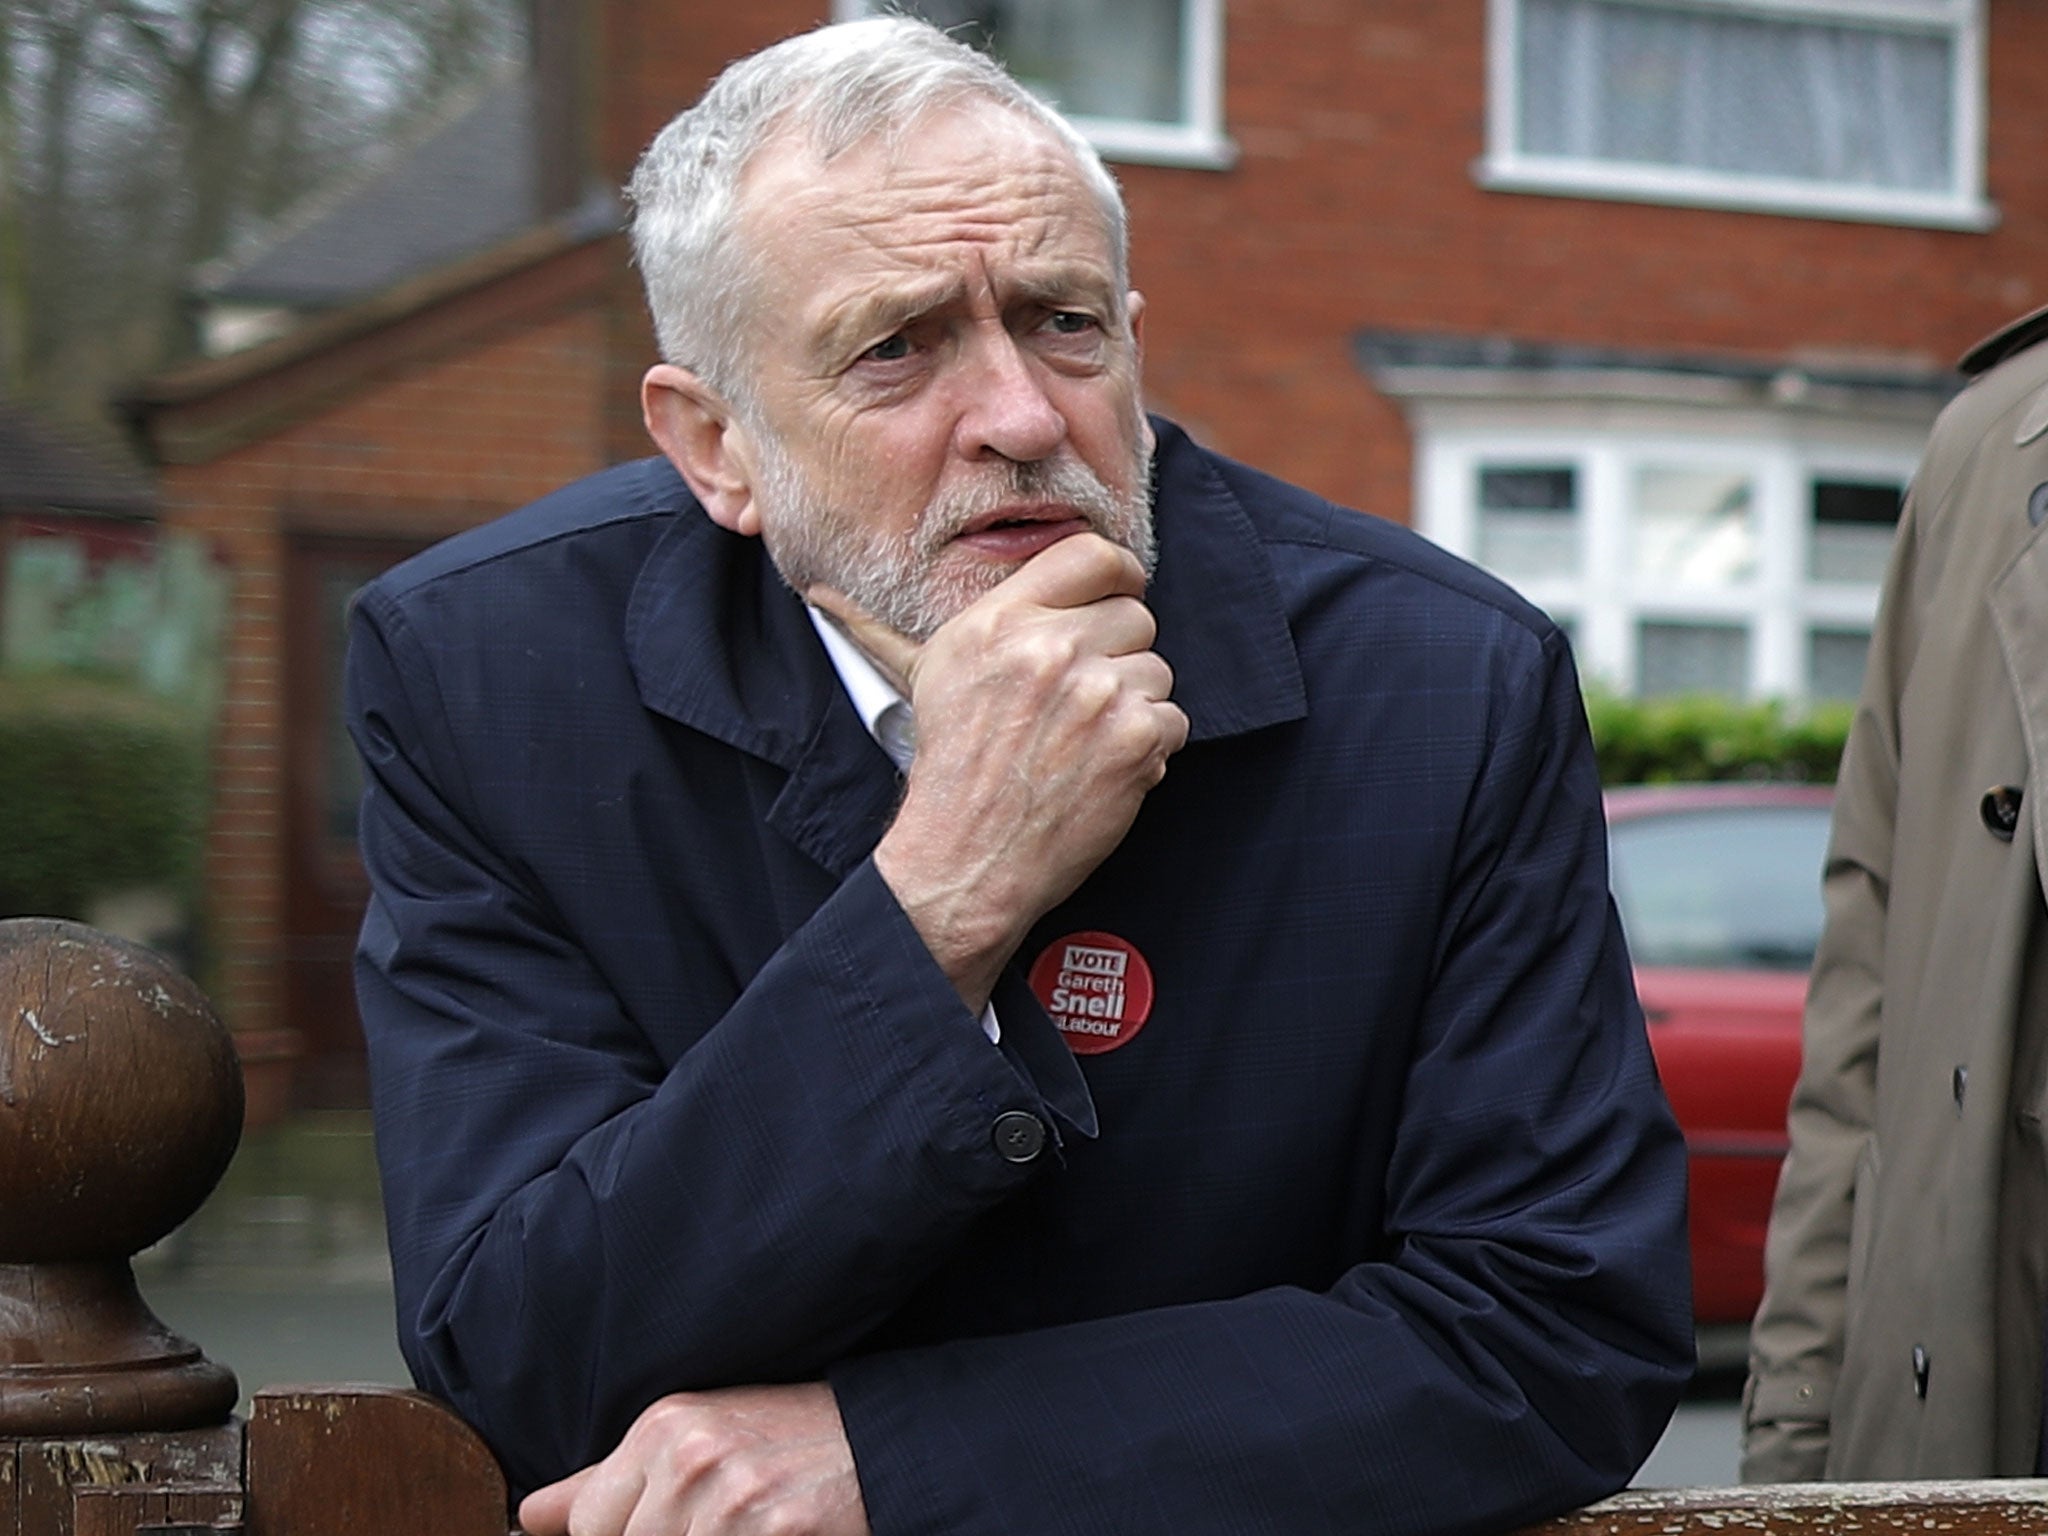 Jeremy Corbyn has ignored calls for his resignation following the Copeland by-election